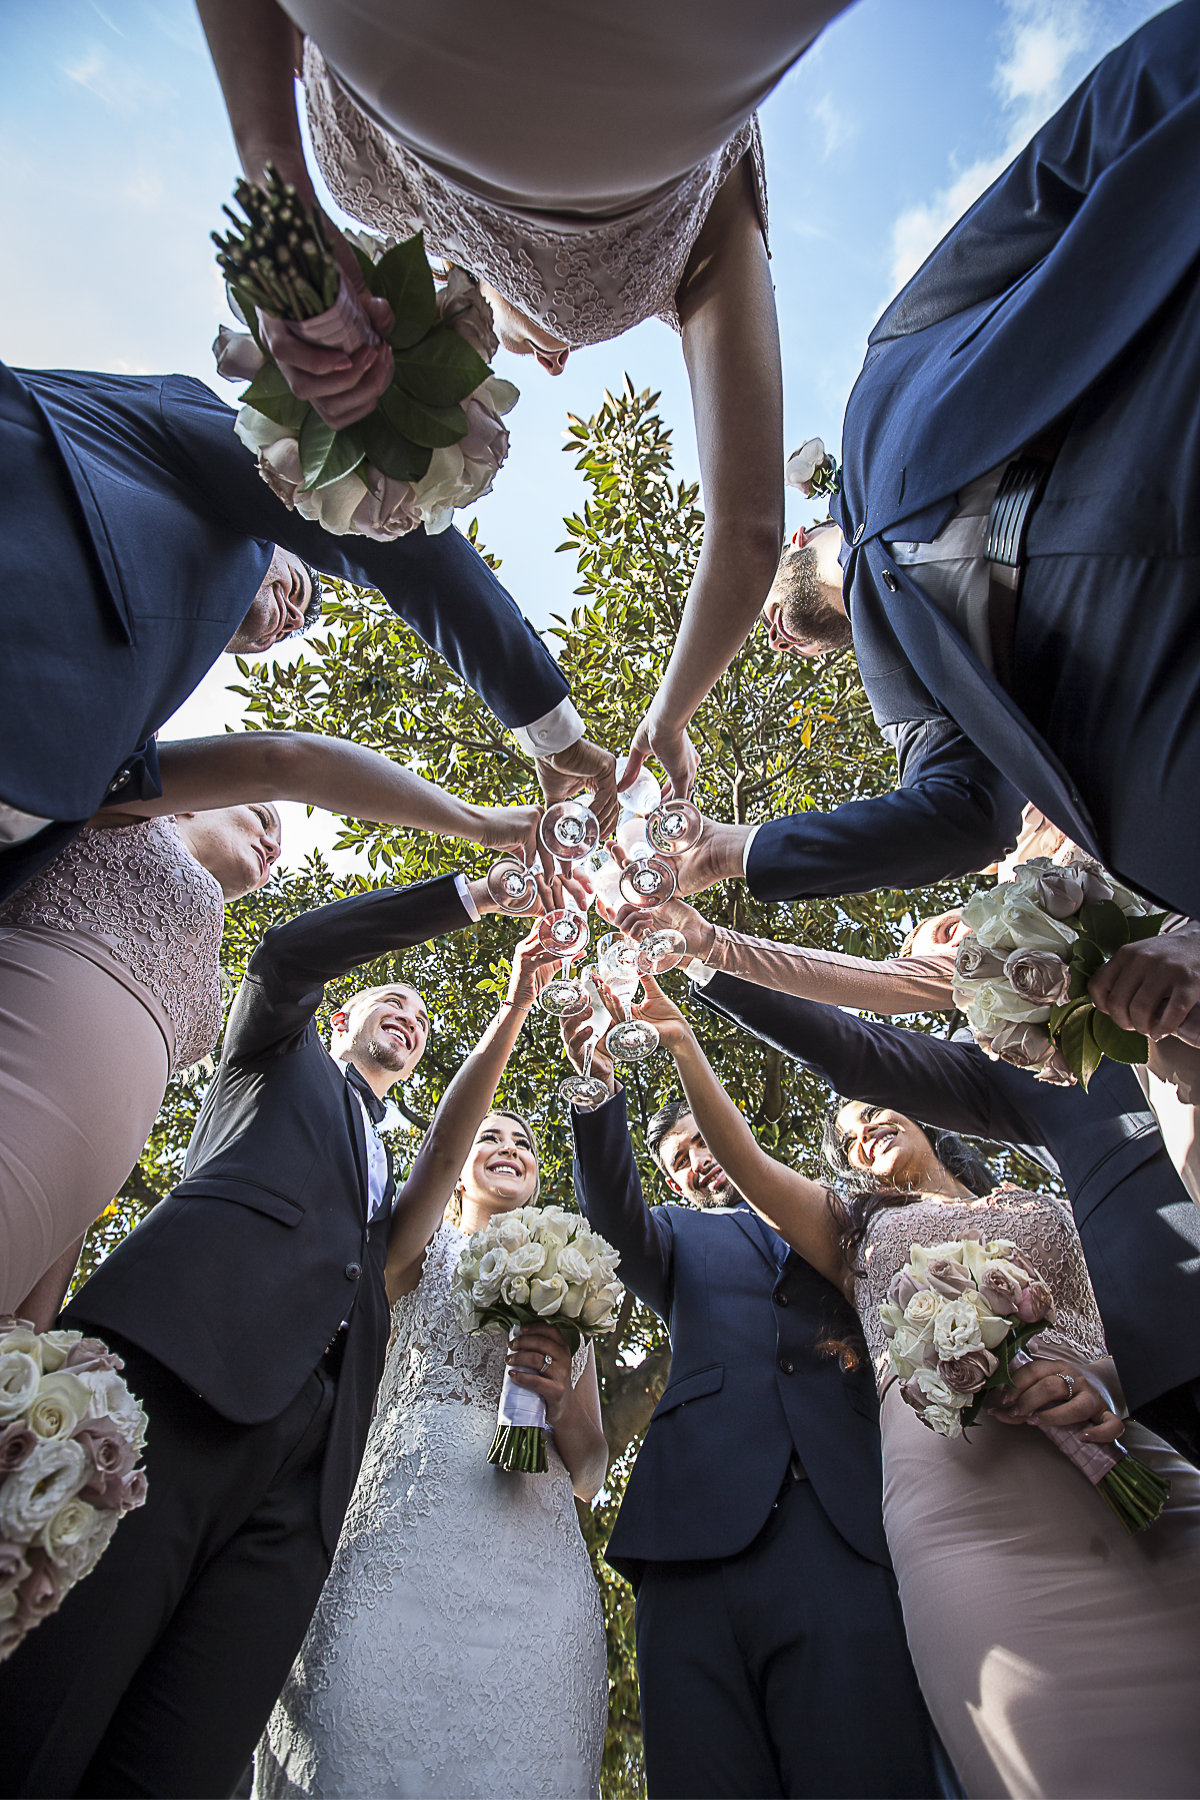 Creative Wedding Champagne Clink Toss at Observatory Hills The Rocks | Fantasie Photography